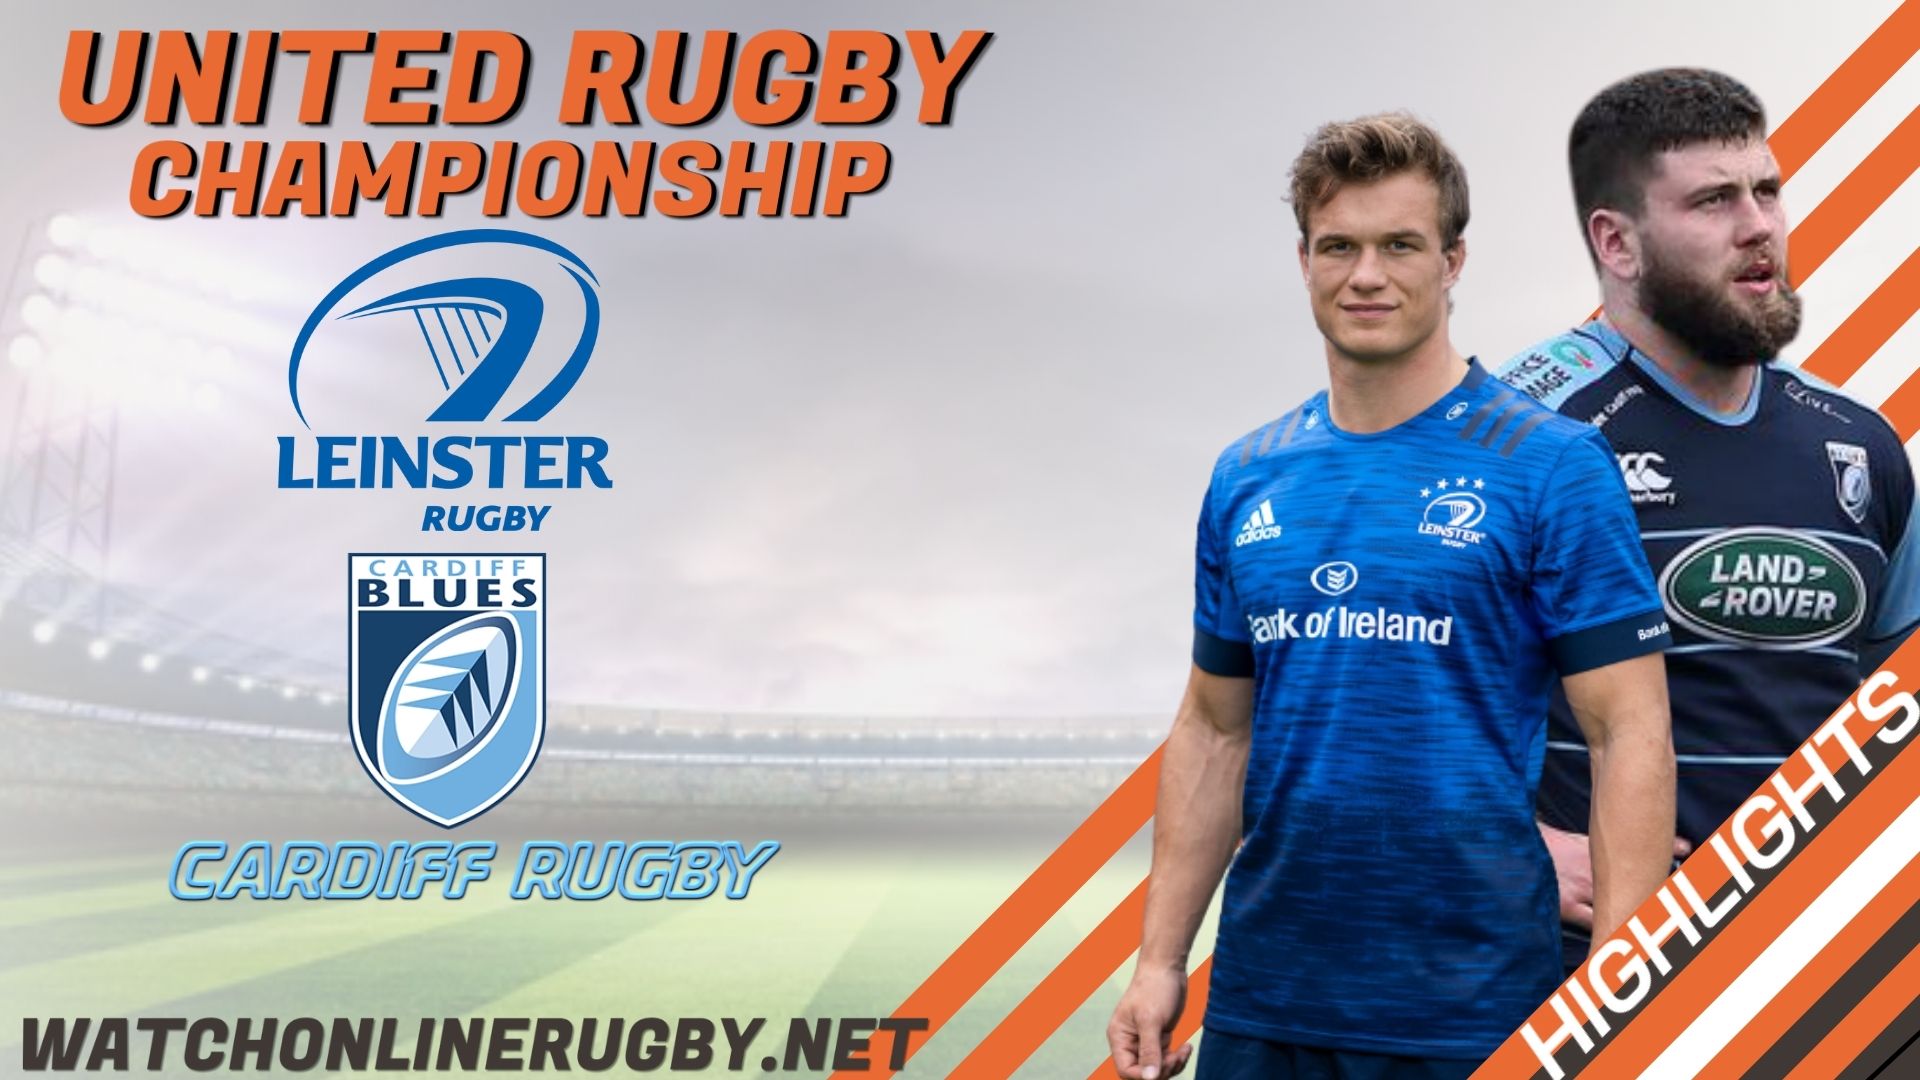 Cardiff Blues Vs Leinster United Rugby Championship 2022 RD 11